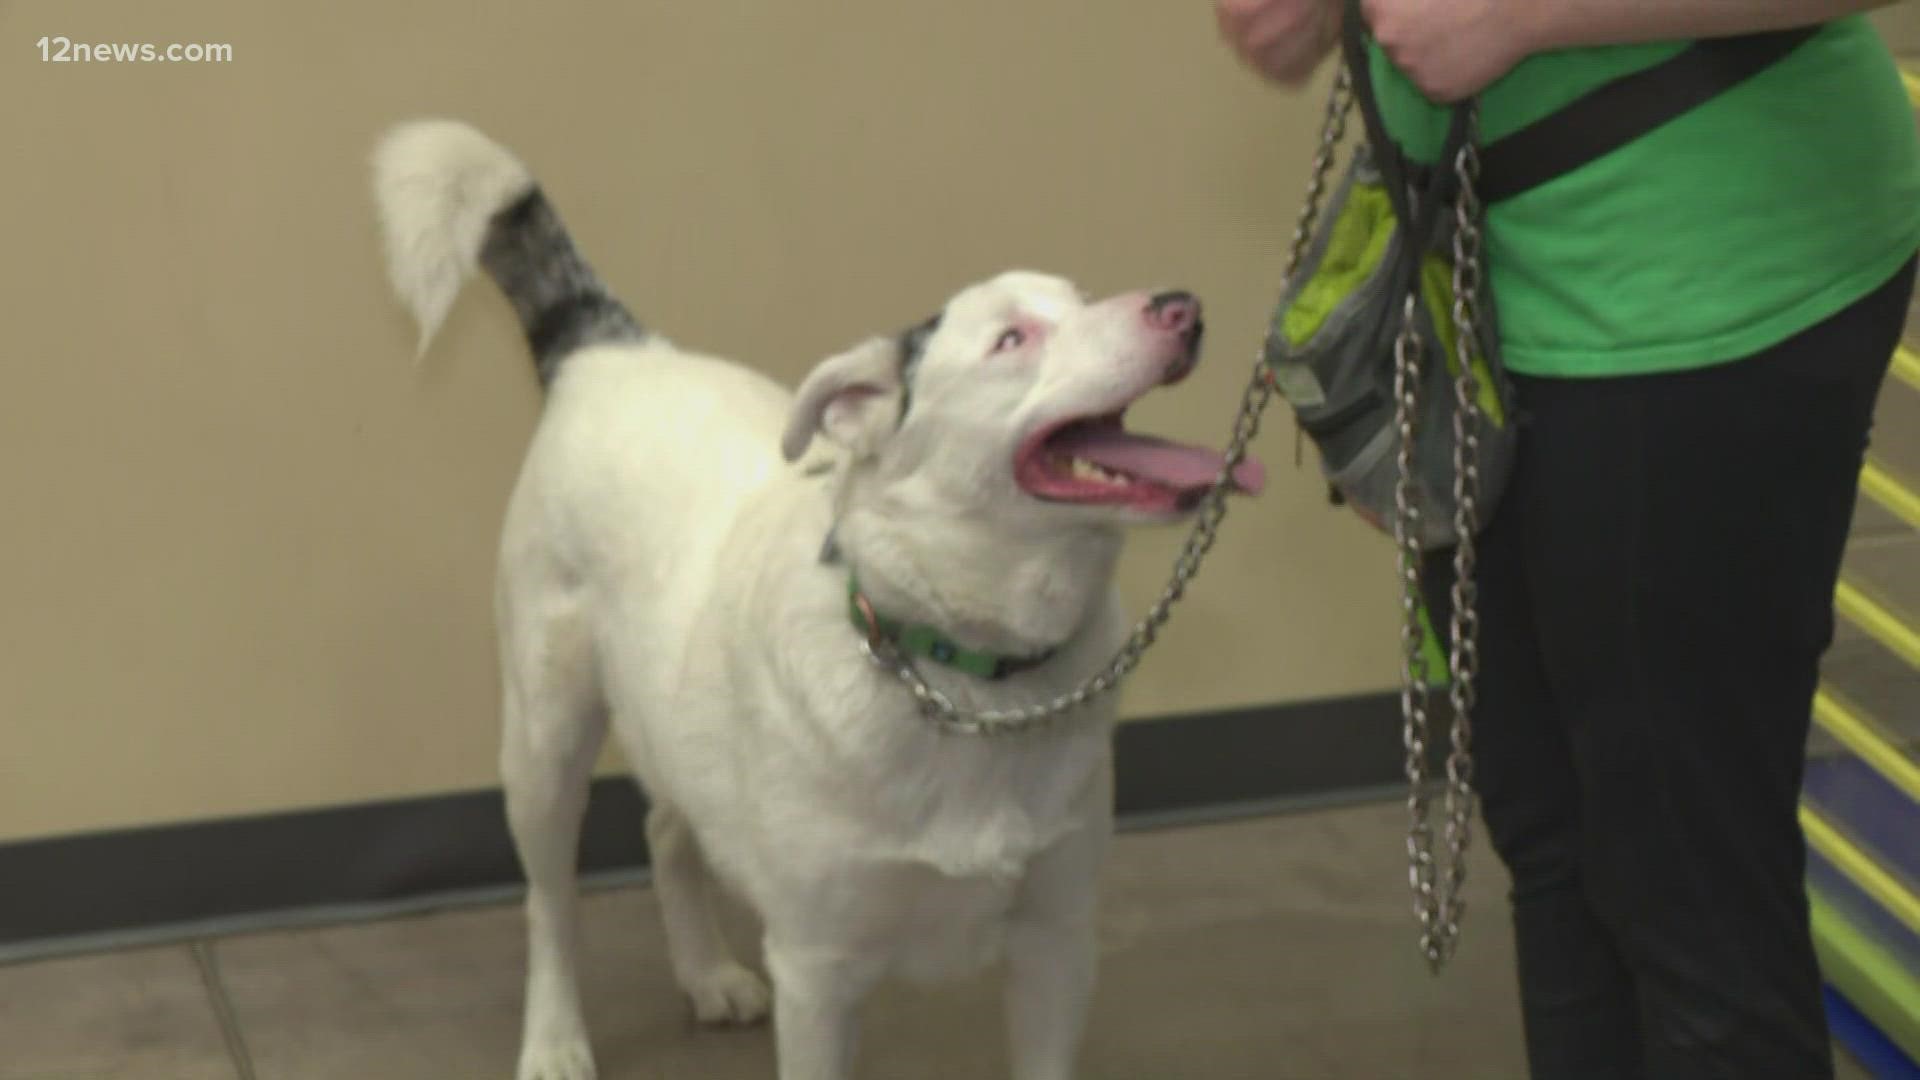 Animal care facilities in Arizona are warning dog owners against merle breeding, which can cause blindness, deafness and other conditions in dogs.